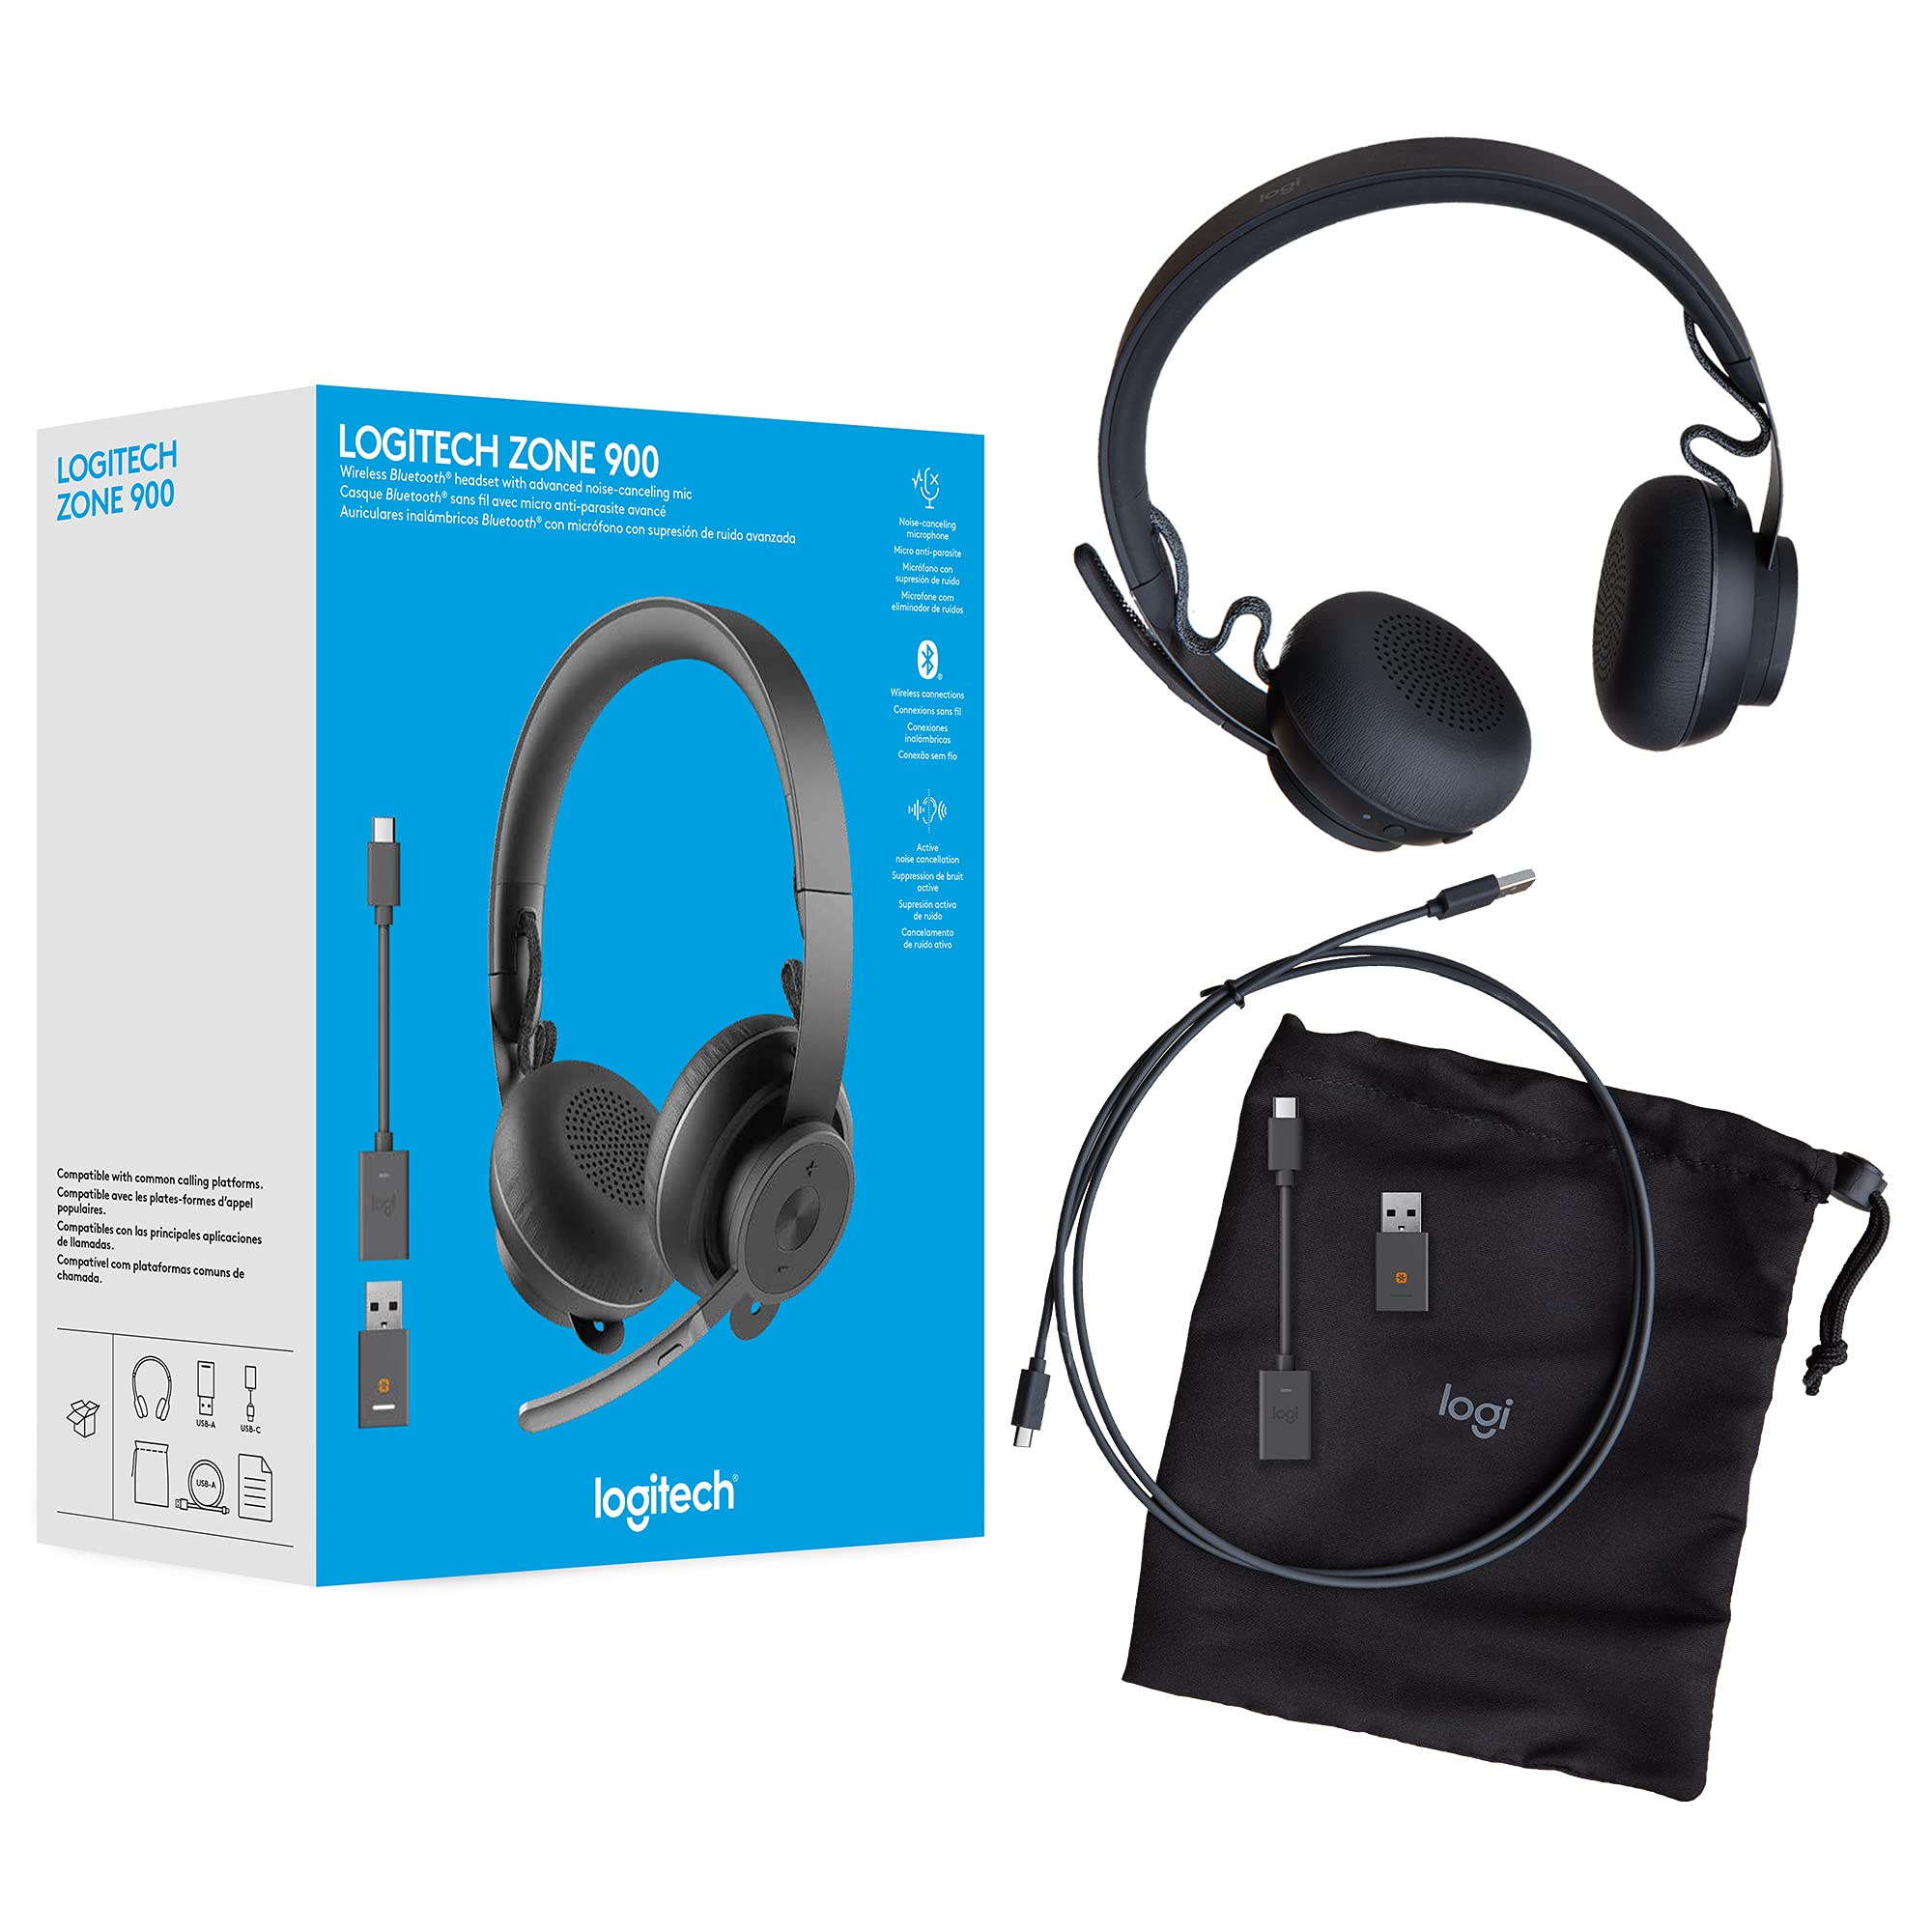 Logitech Zone 900 On-Ear Wireless Bluetooth Headset with Advanced Noise-canceling Microphone, Connect up to 6 Wireless Devices with one Receiver, Quick Access to ANC and Bluetooth